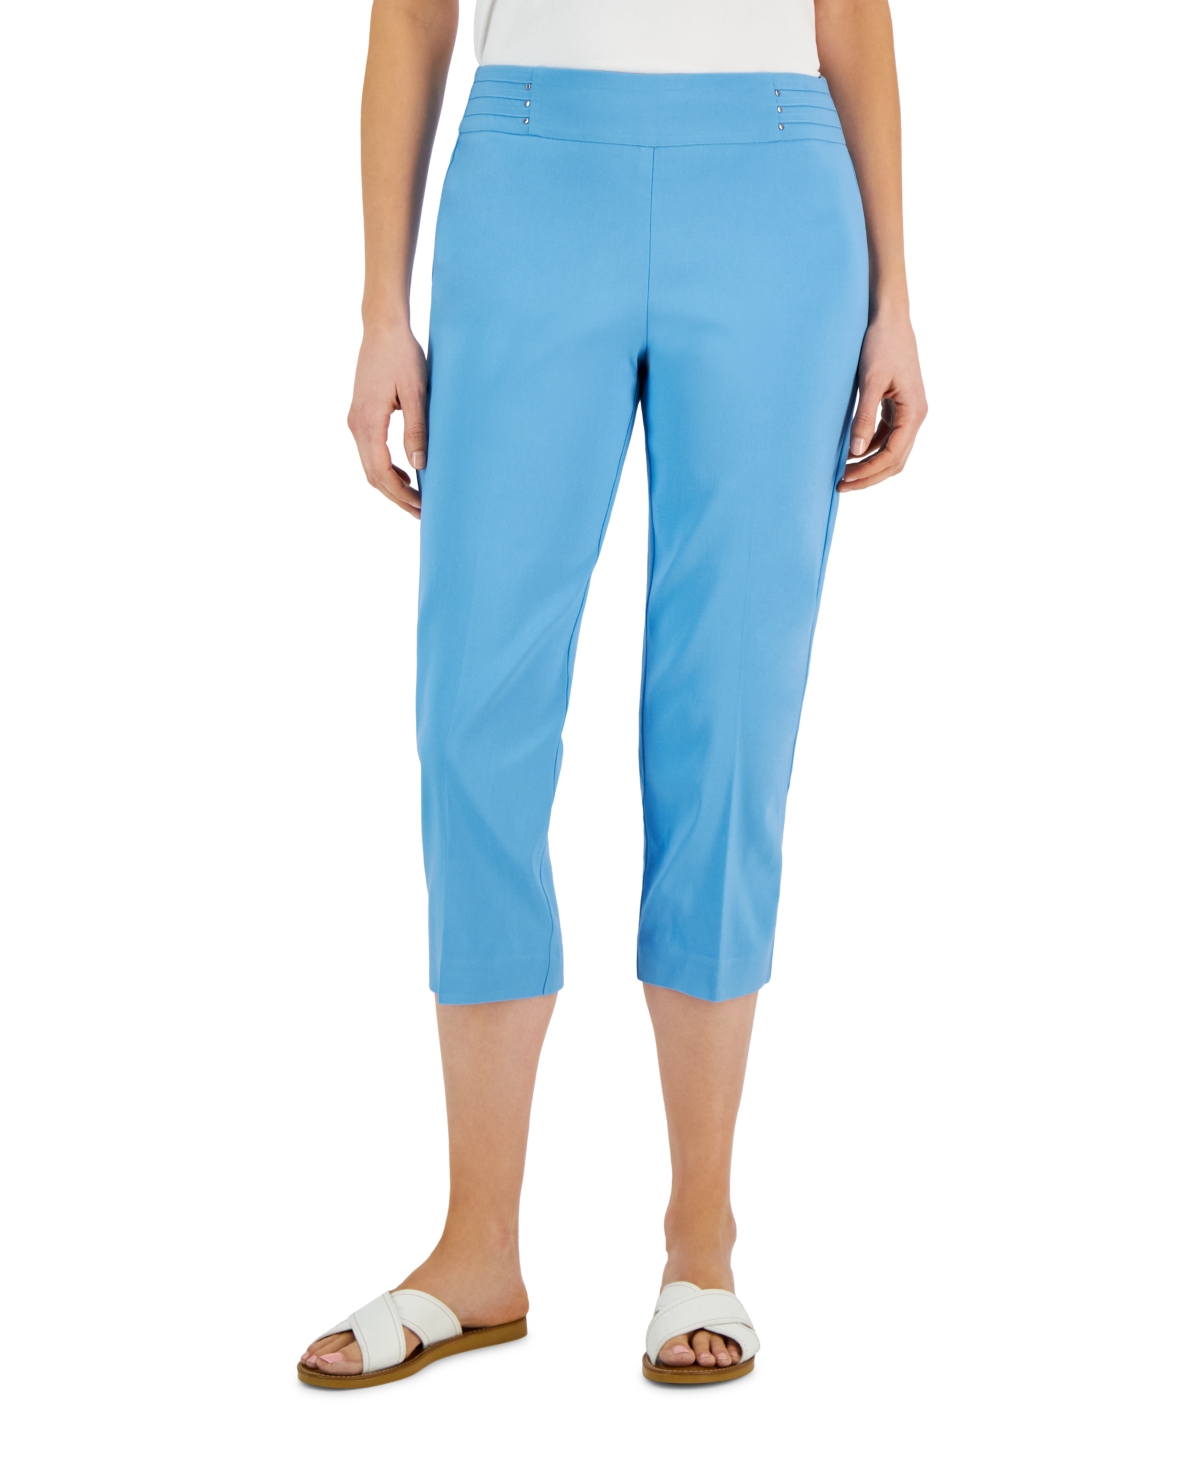 Jm Collection Embellished Pull-On Capri Pants, Created for Macy's